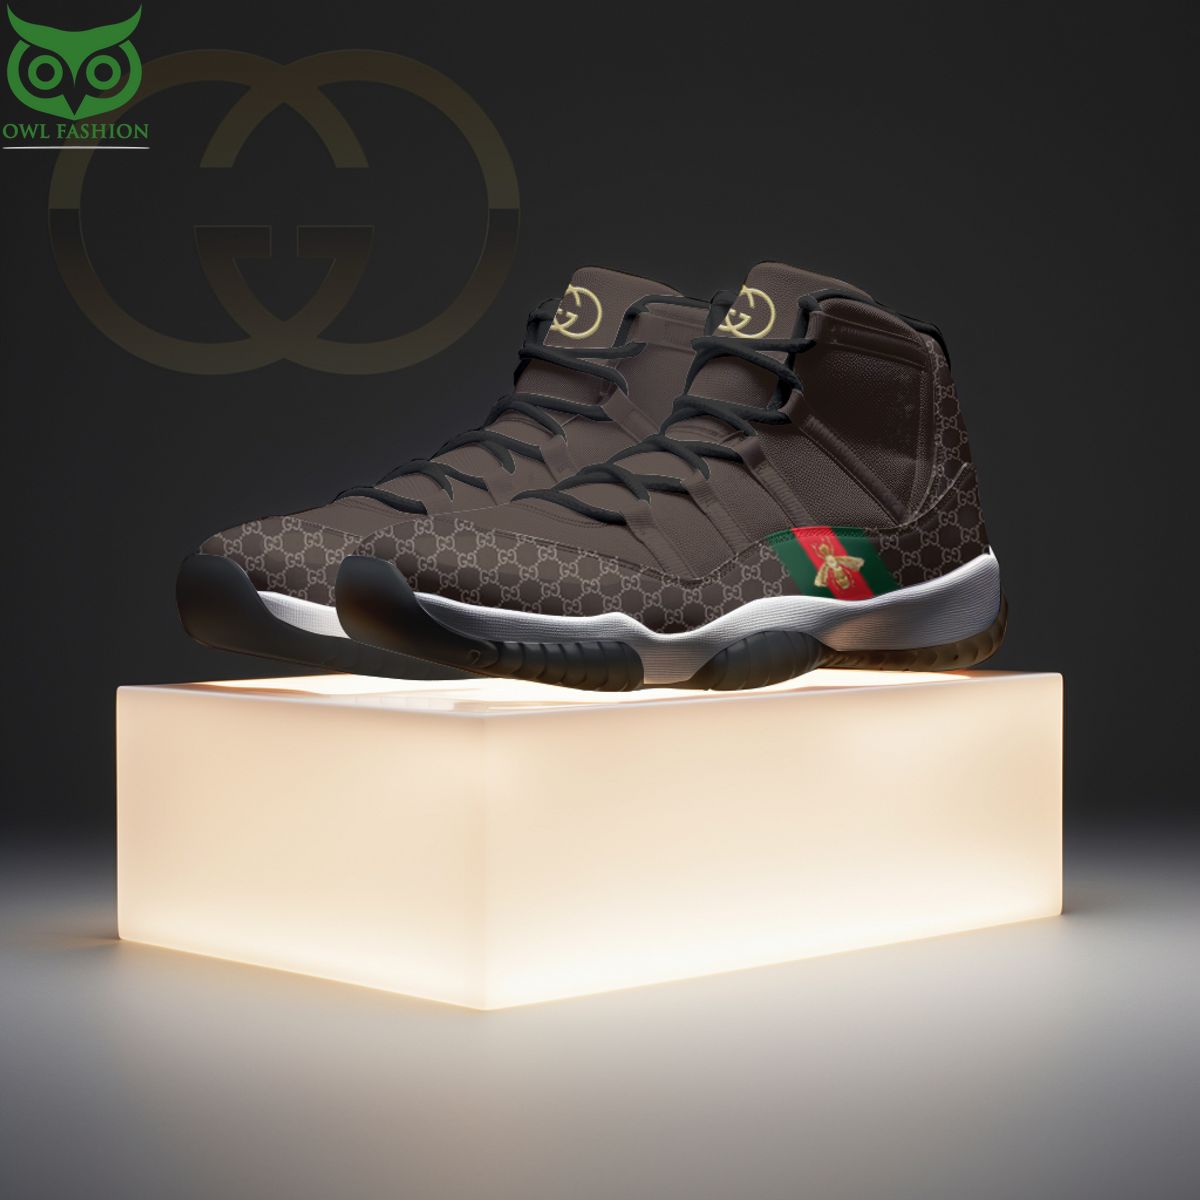 Limited Gucci Luxury Sneakers Air Jordan 11 You look so healthy and fit